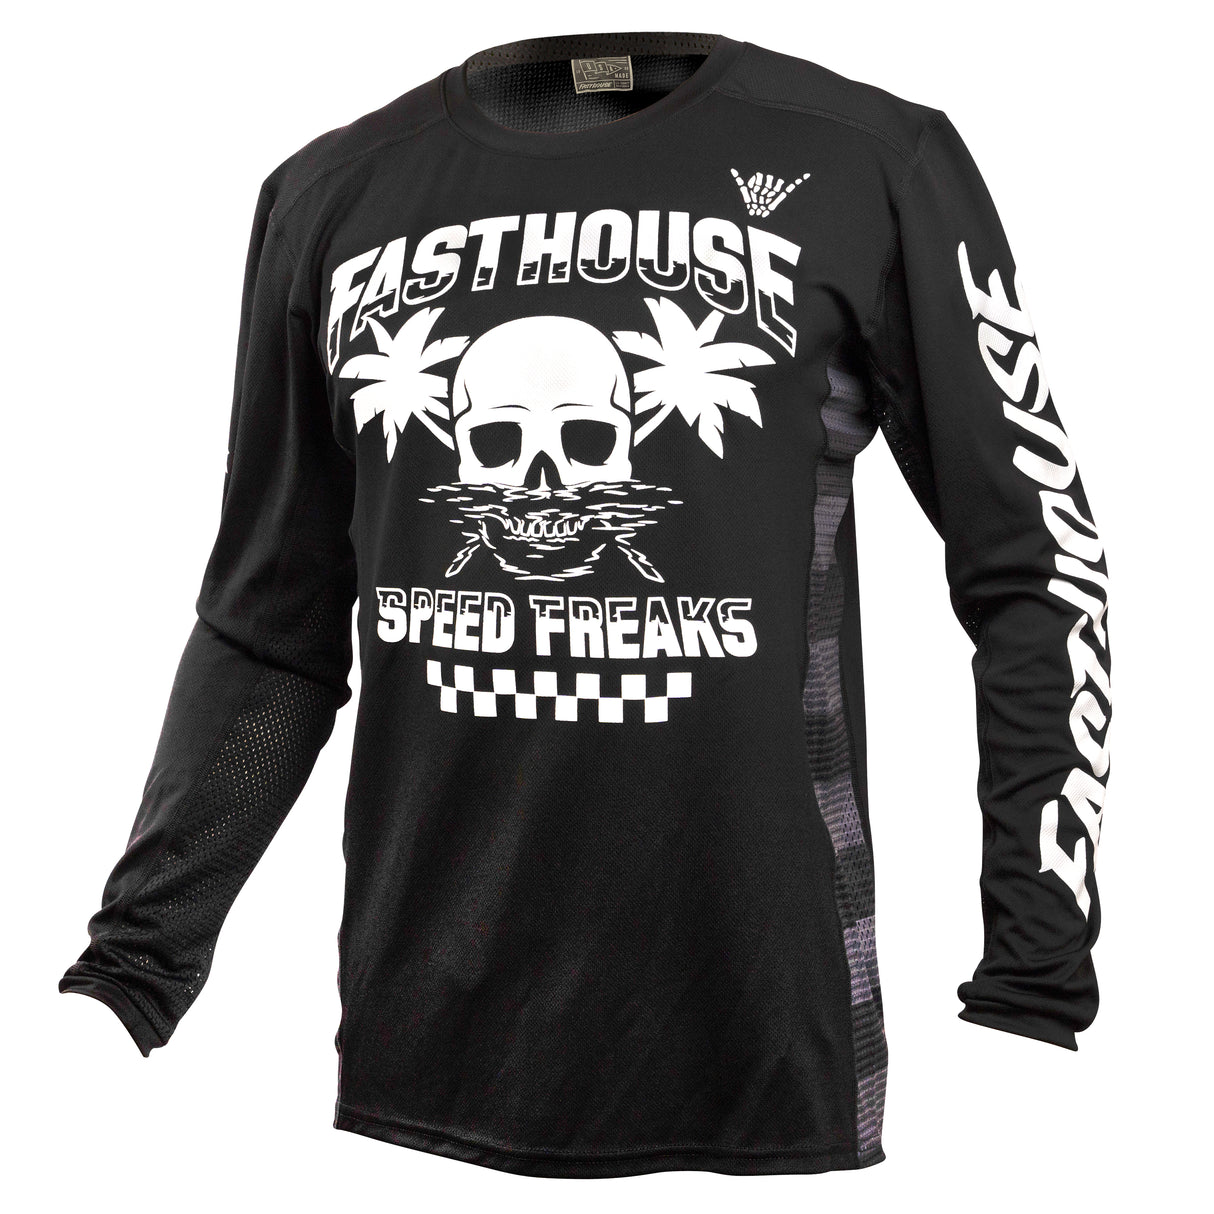 Fasthouse USA Grindhouse Subside Maillot manches longues